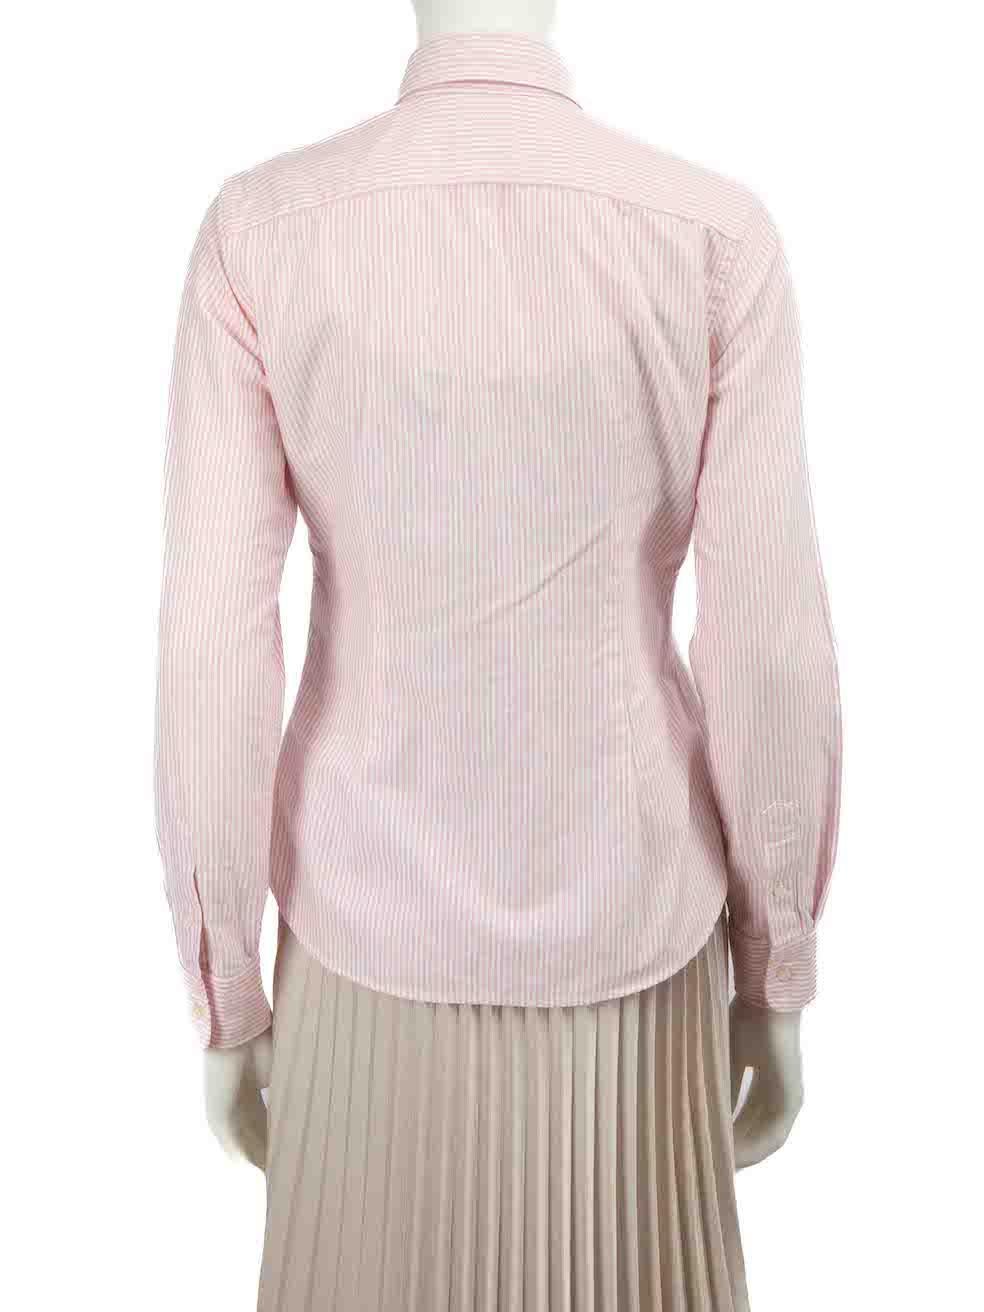 Ralph Lauren Pink Striped Long Sleeves Shirt Size M In Good Condition For Sale In London, GB